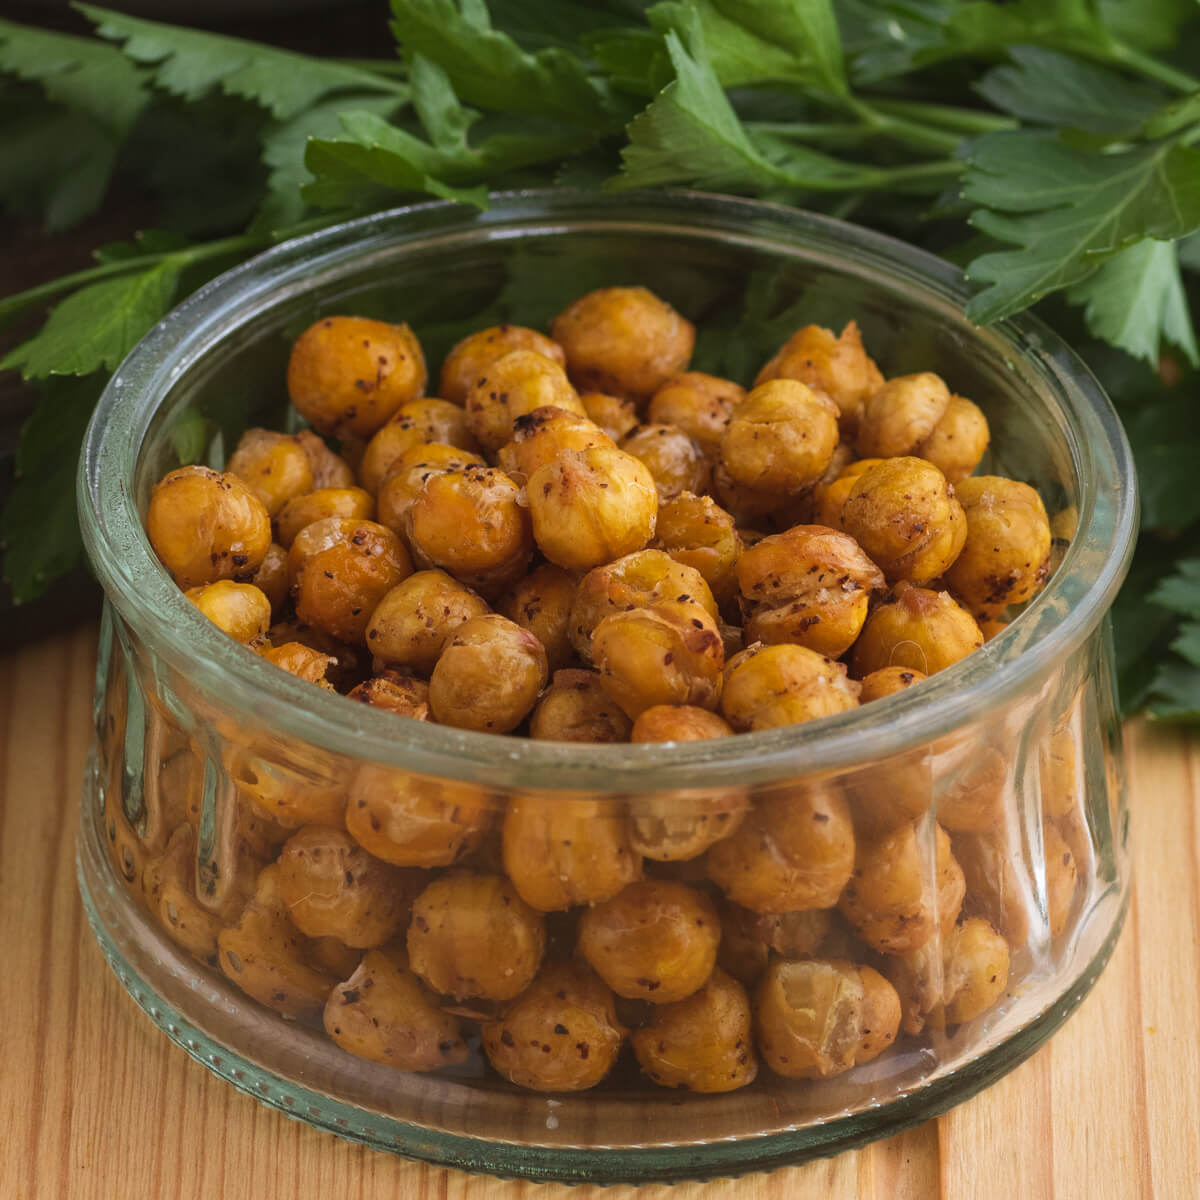 A bowl of golden roasted chickpeas.